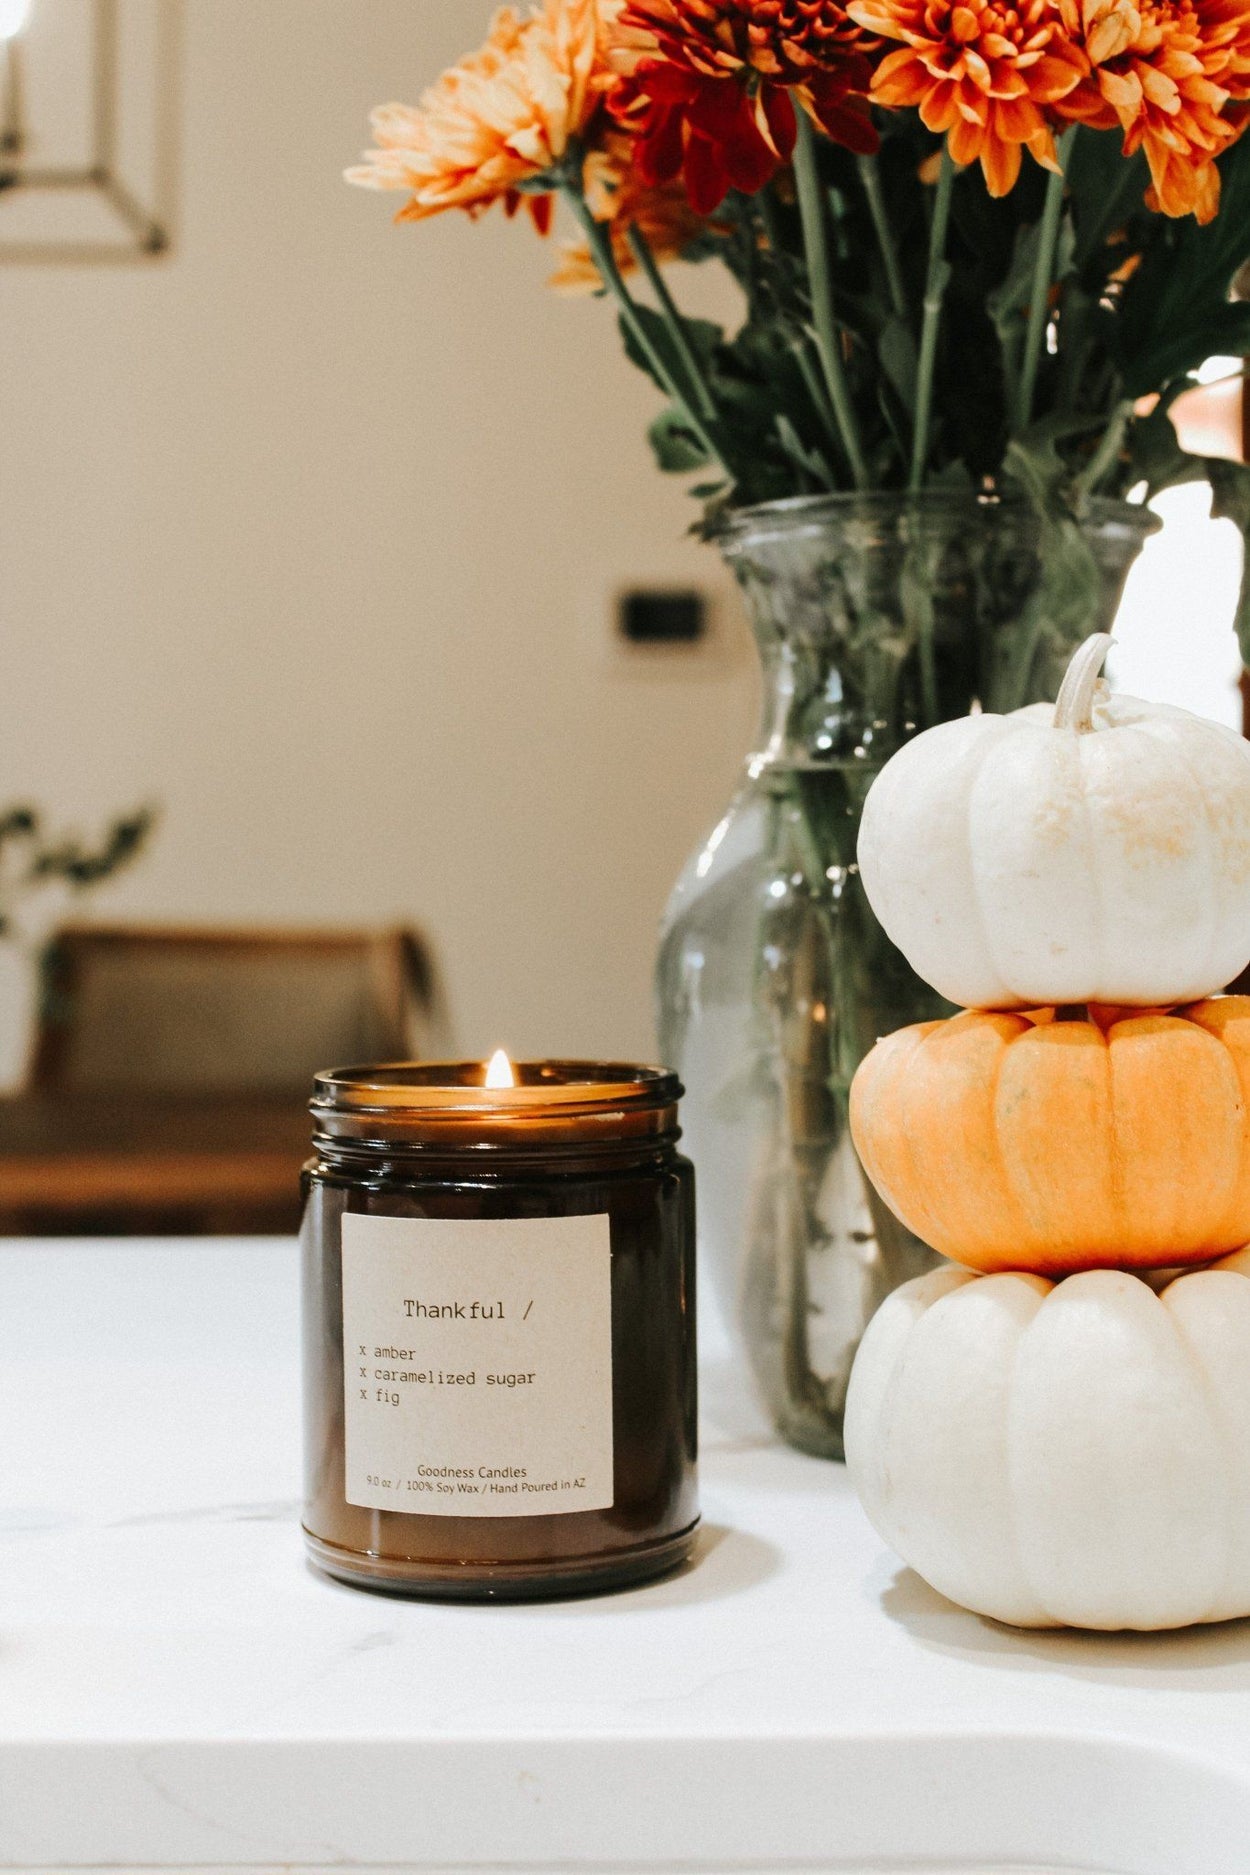 Thankful Goodness Candles